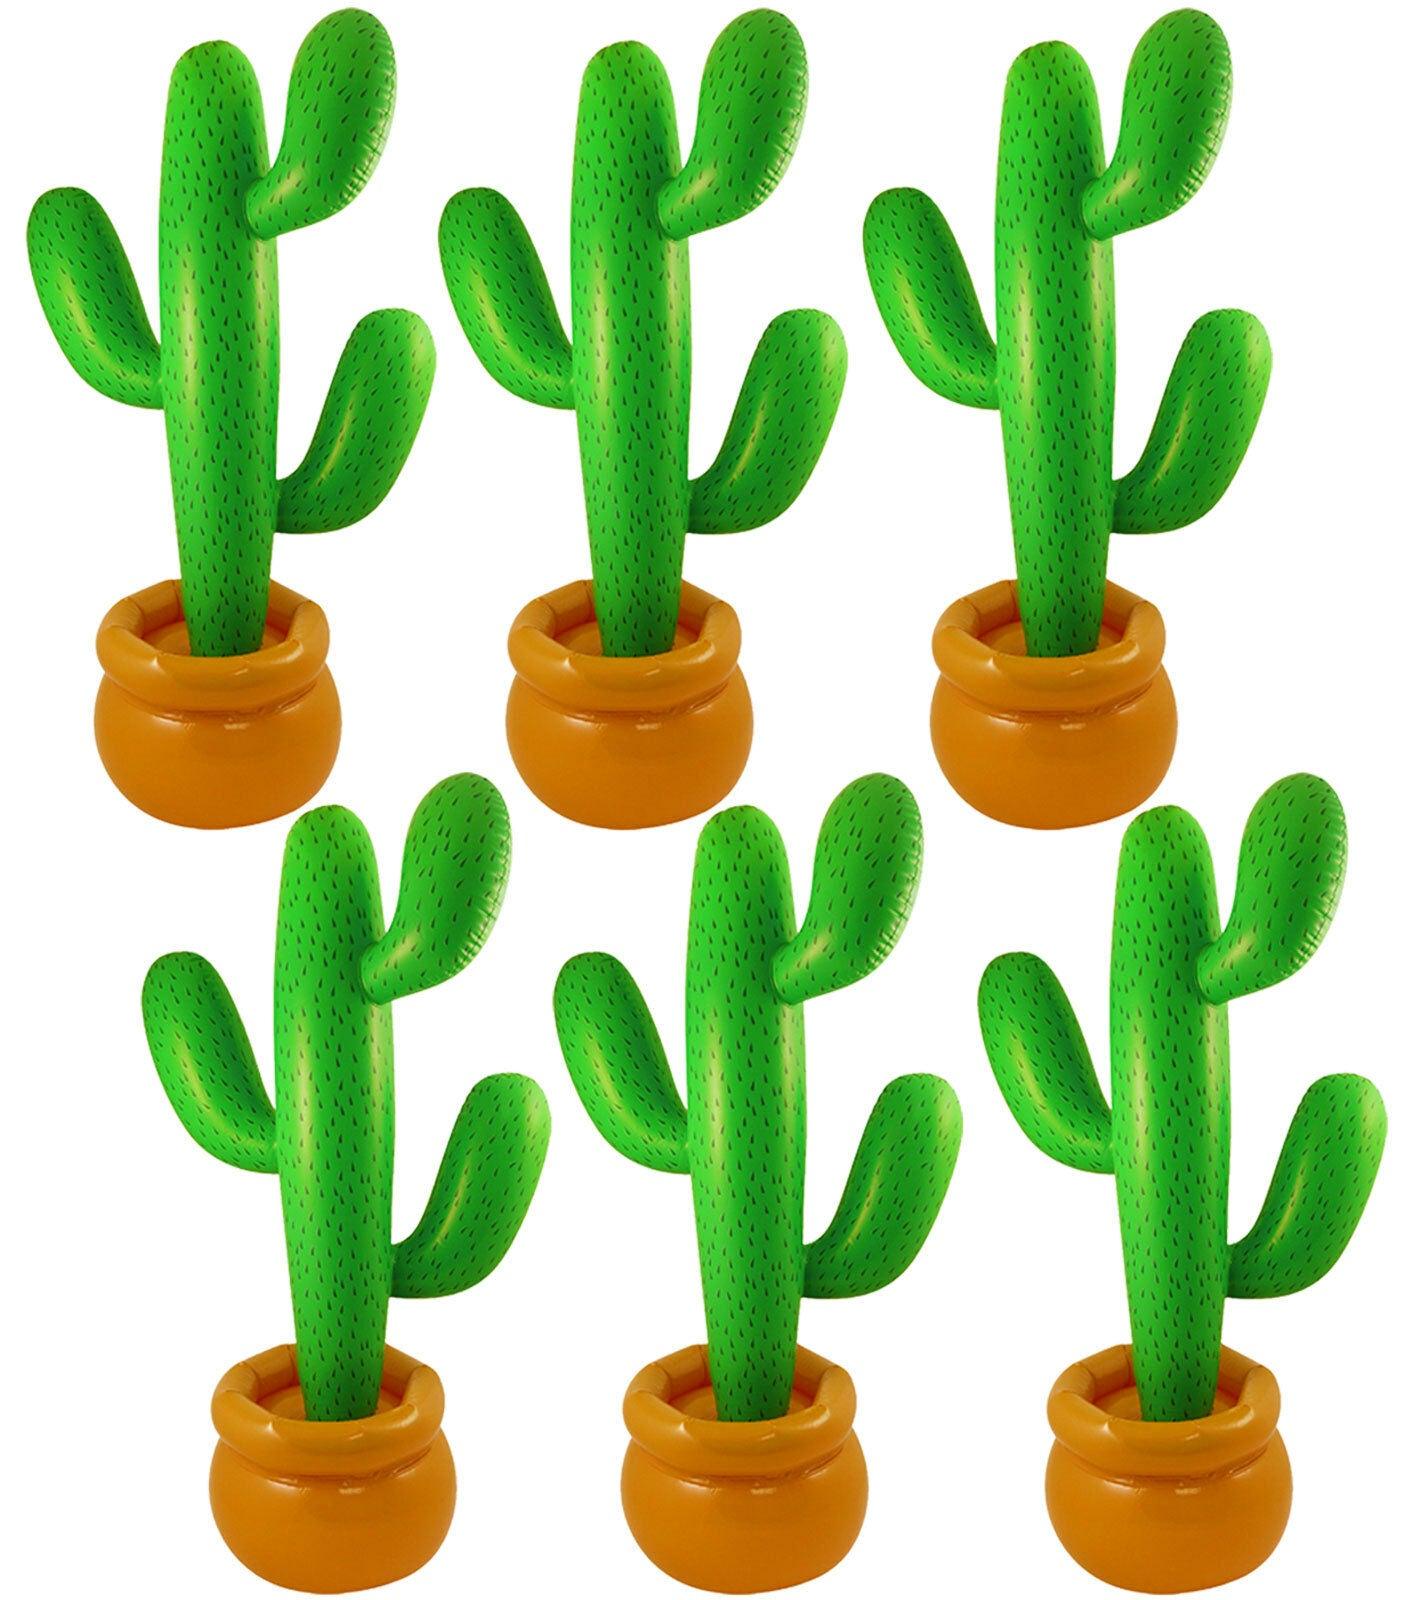 PACK OF 6 JUMBO 86 CM INFLATABLE CACTUS MEXICAN SCENE SETTER PARTY DECORATION - Labreeze